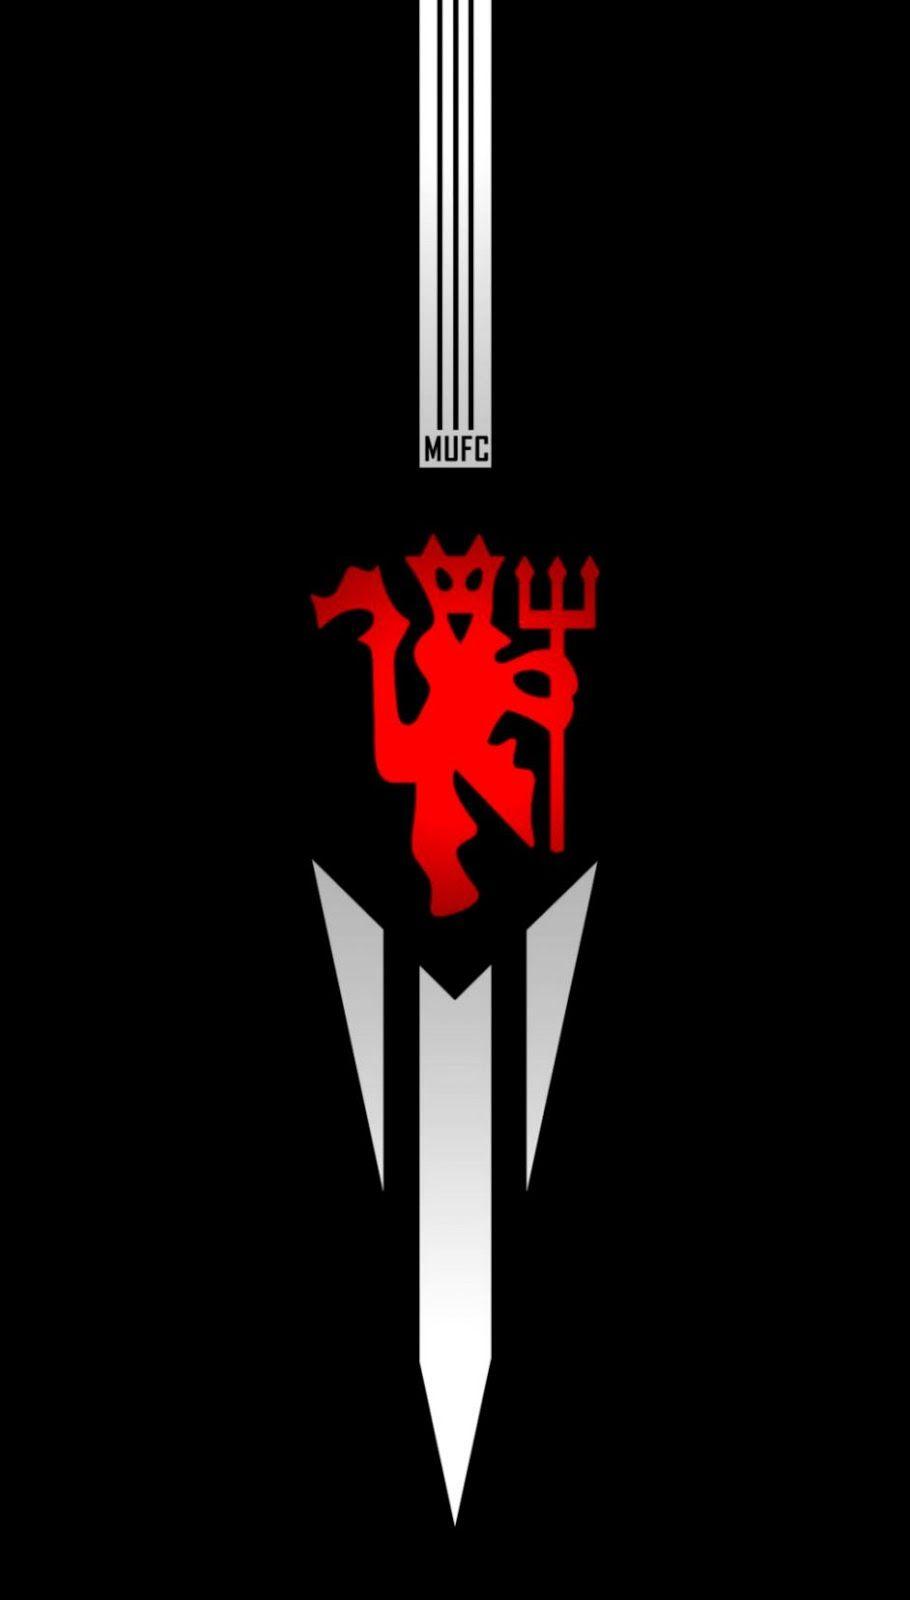 Manchester United Wallpaper Free Manchester United